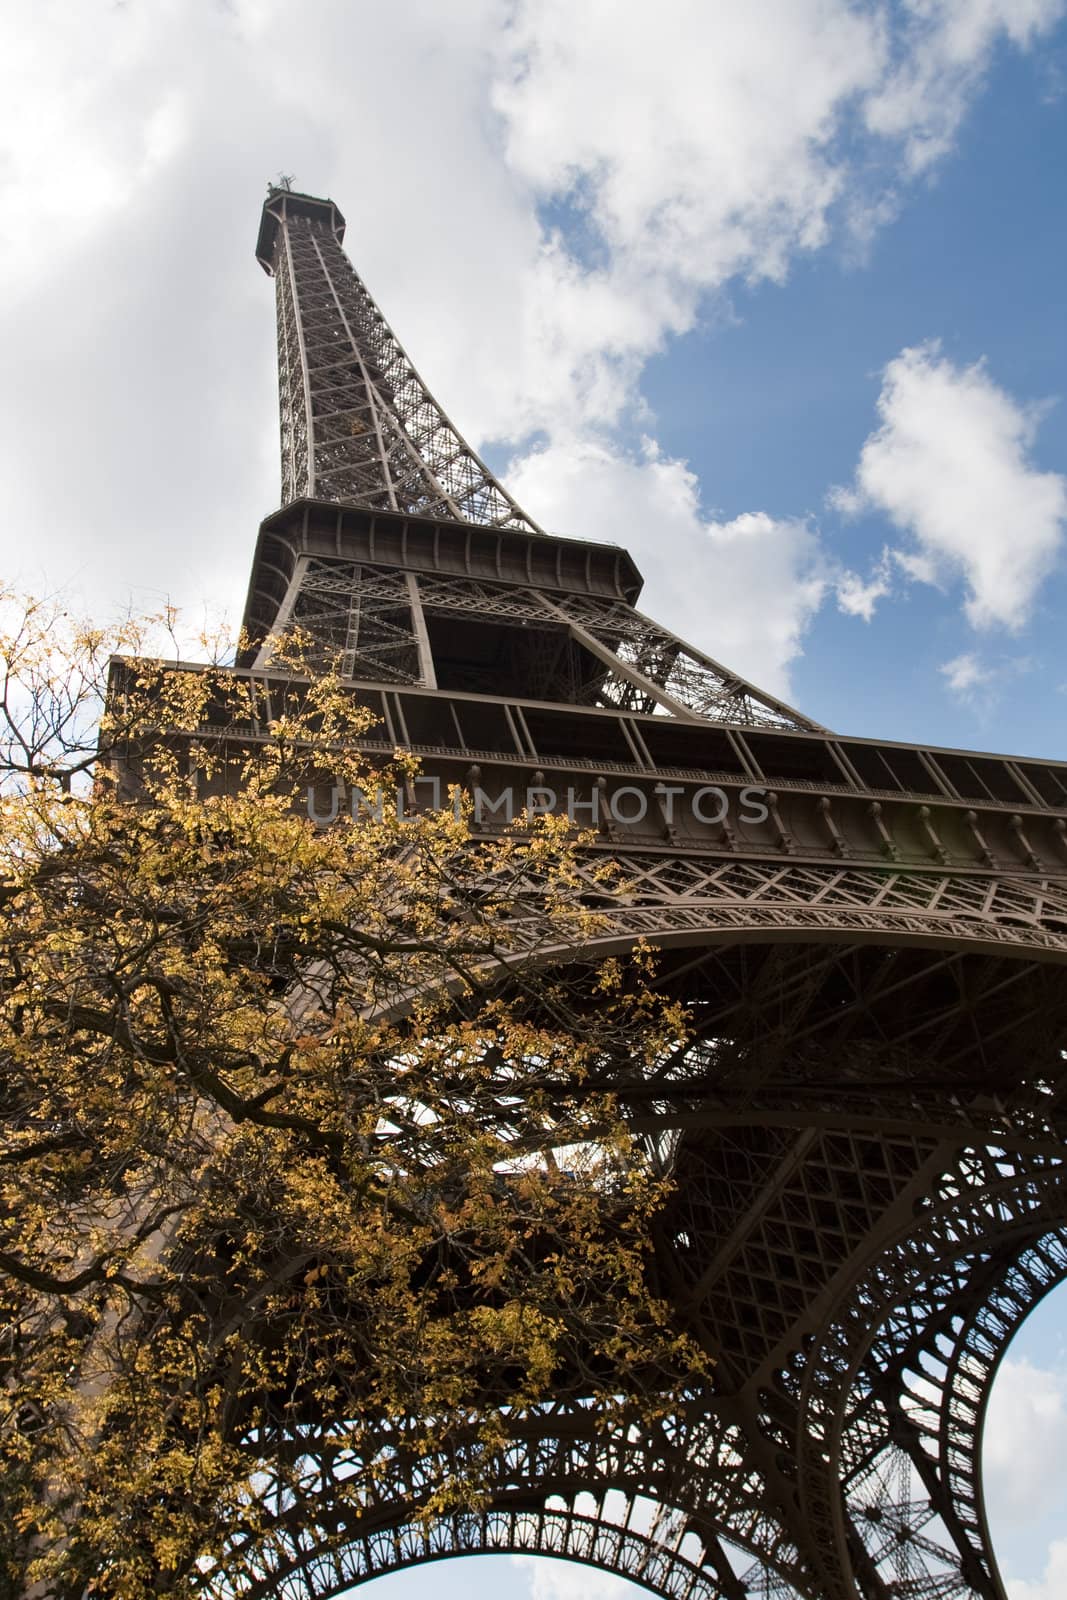 View at Eiffel Tower from low angle